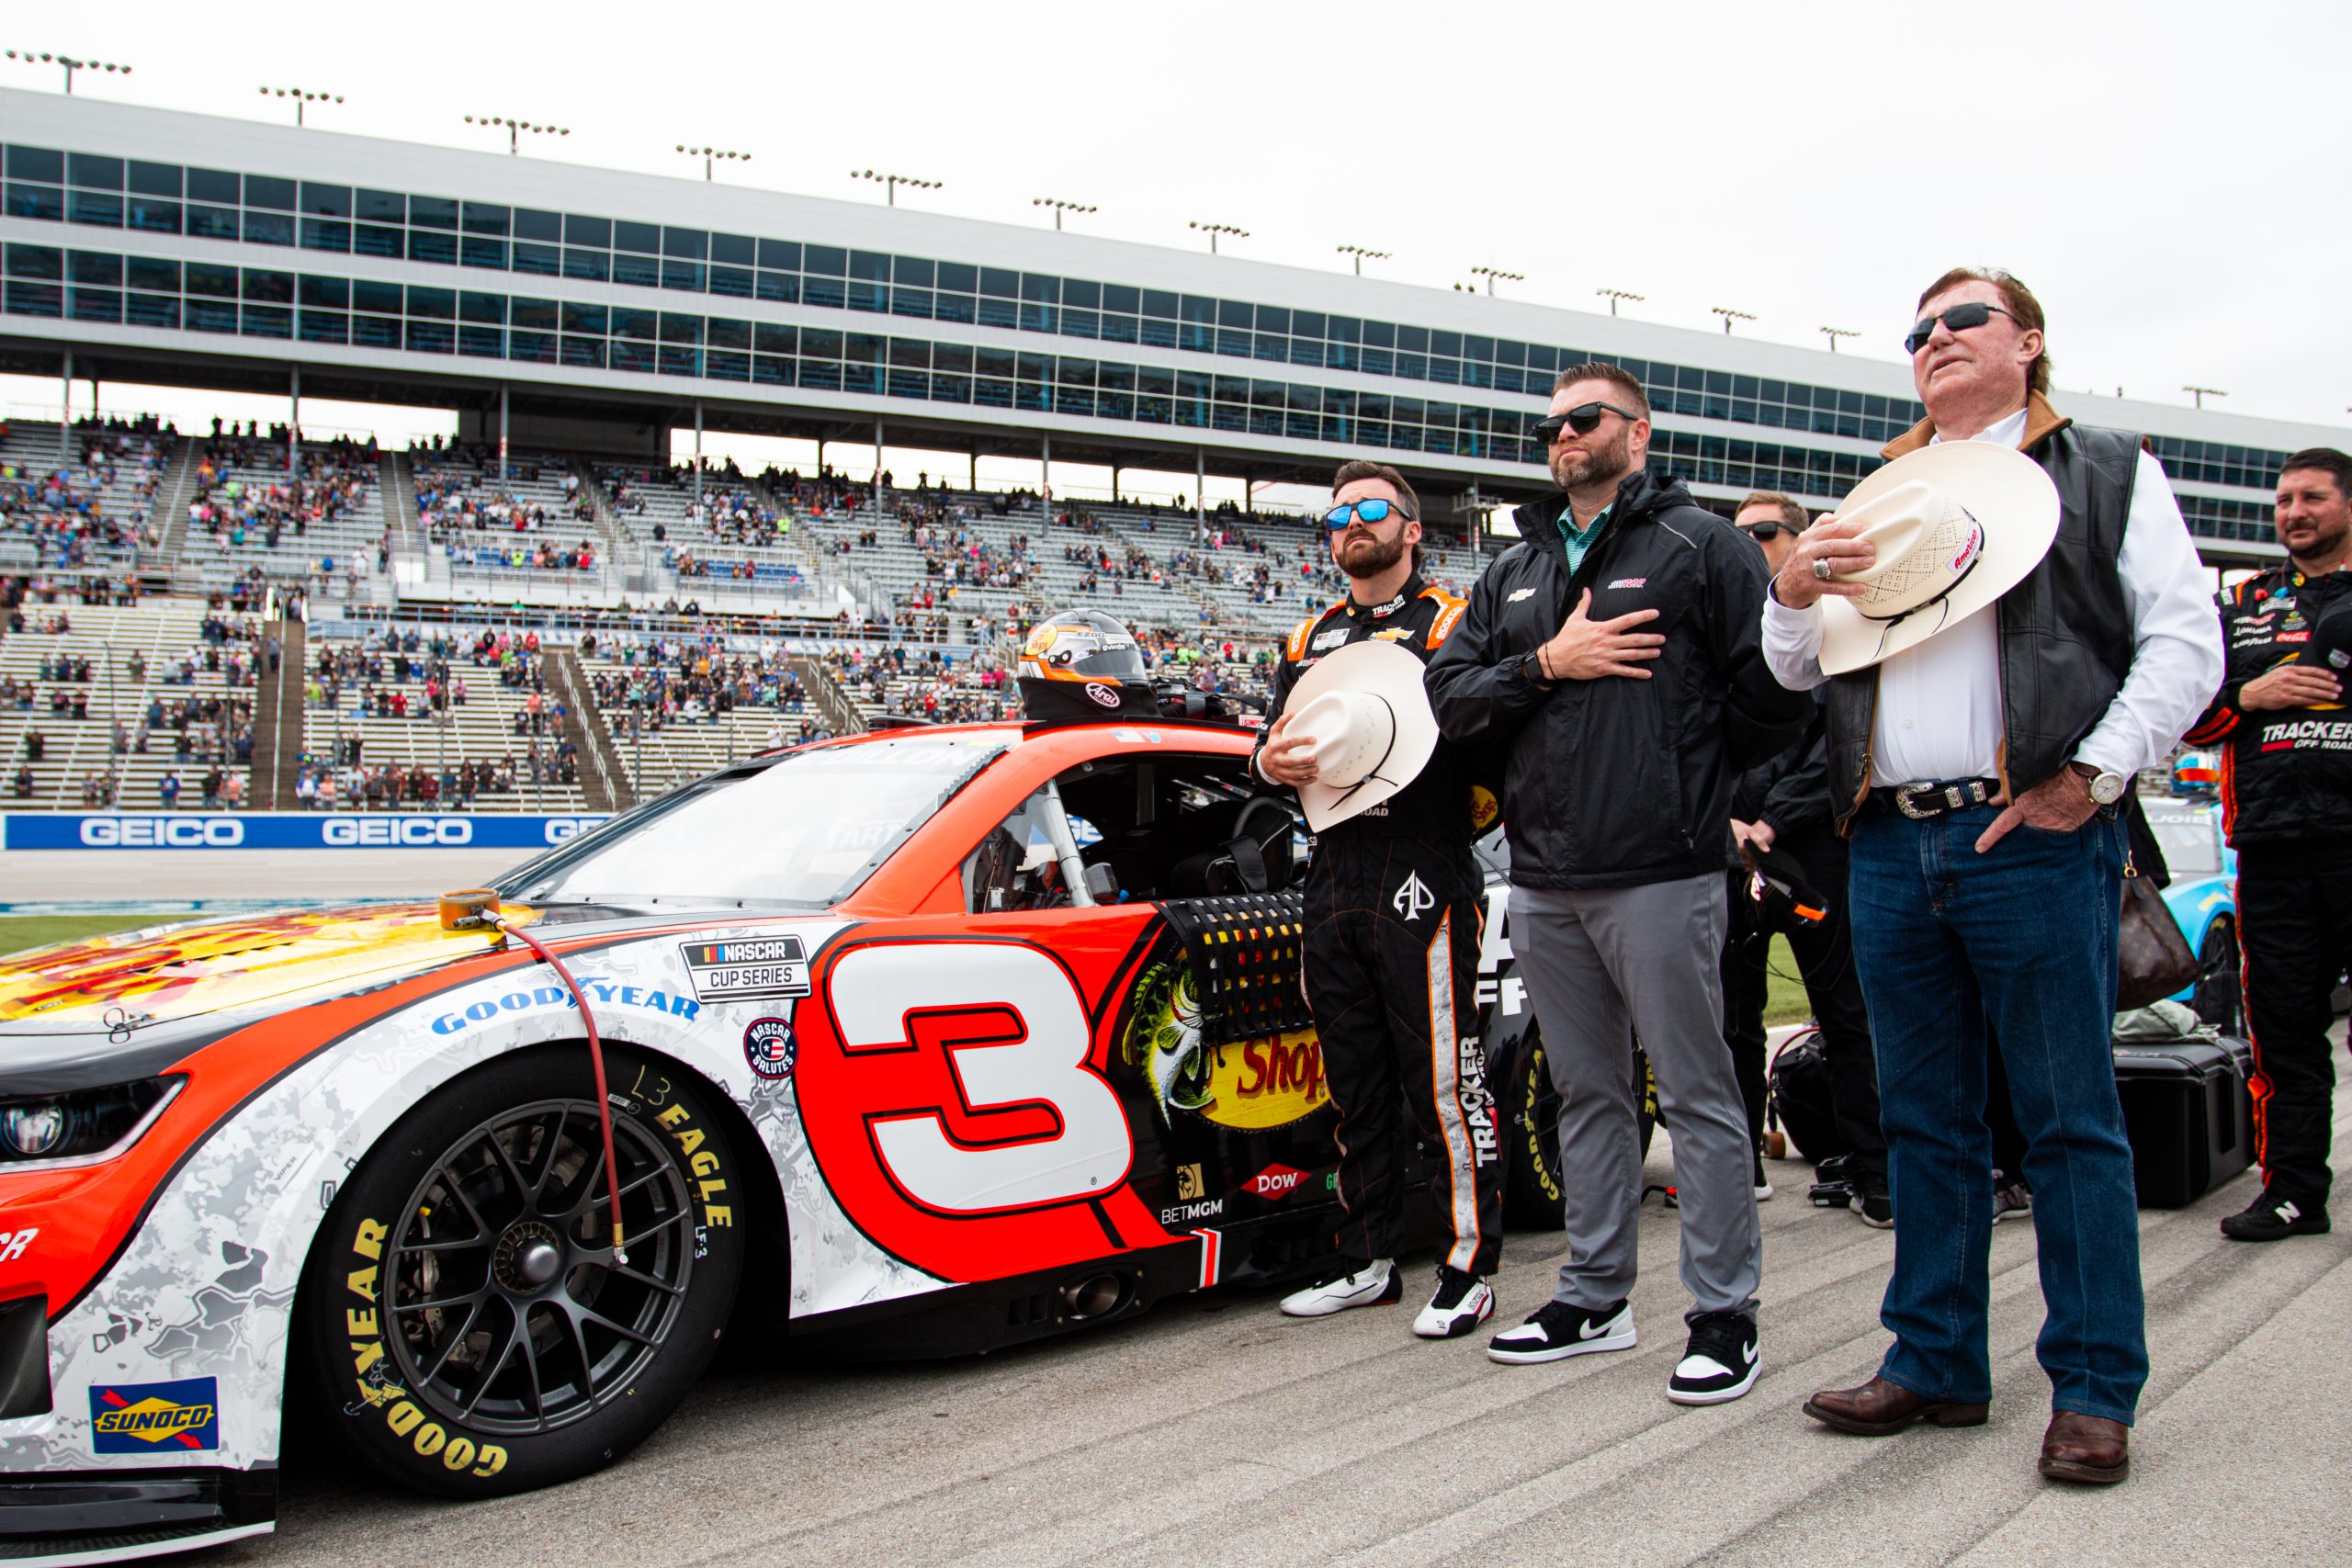 Richard Childress' Grandson Austin Dillon continues to show speed in the 3 car (Photo: Dylan Nadwodny | TPF)